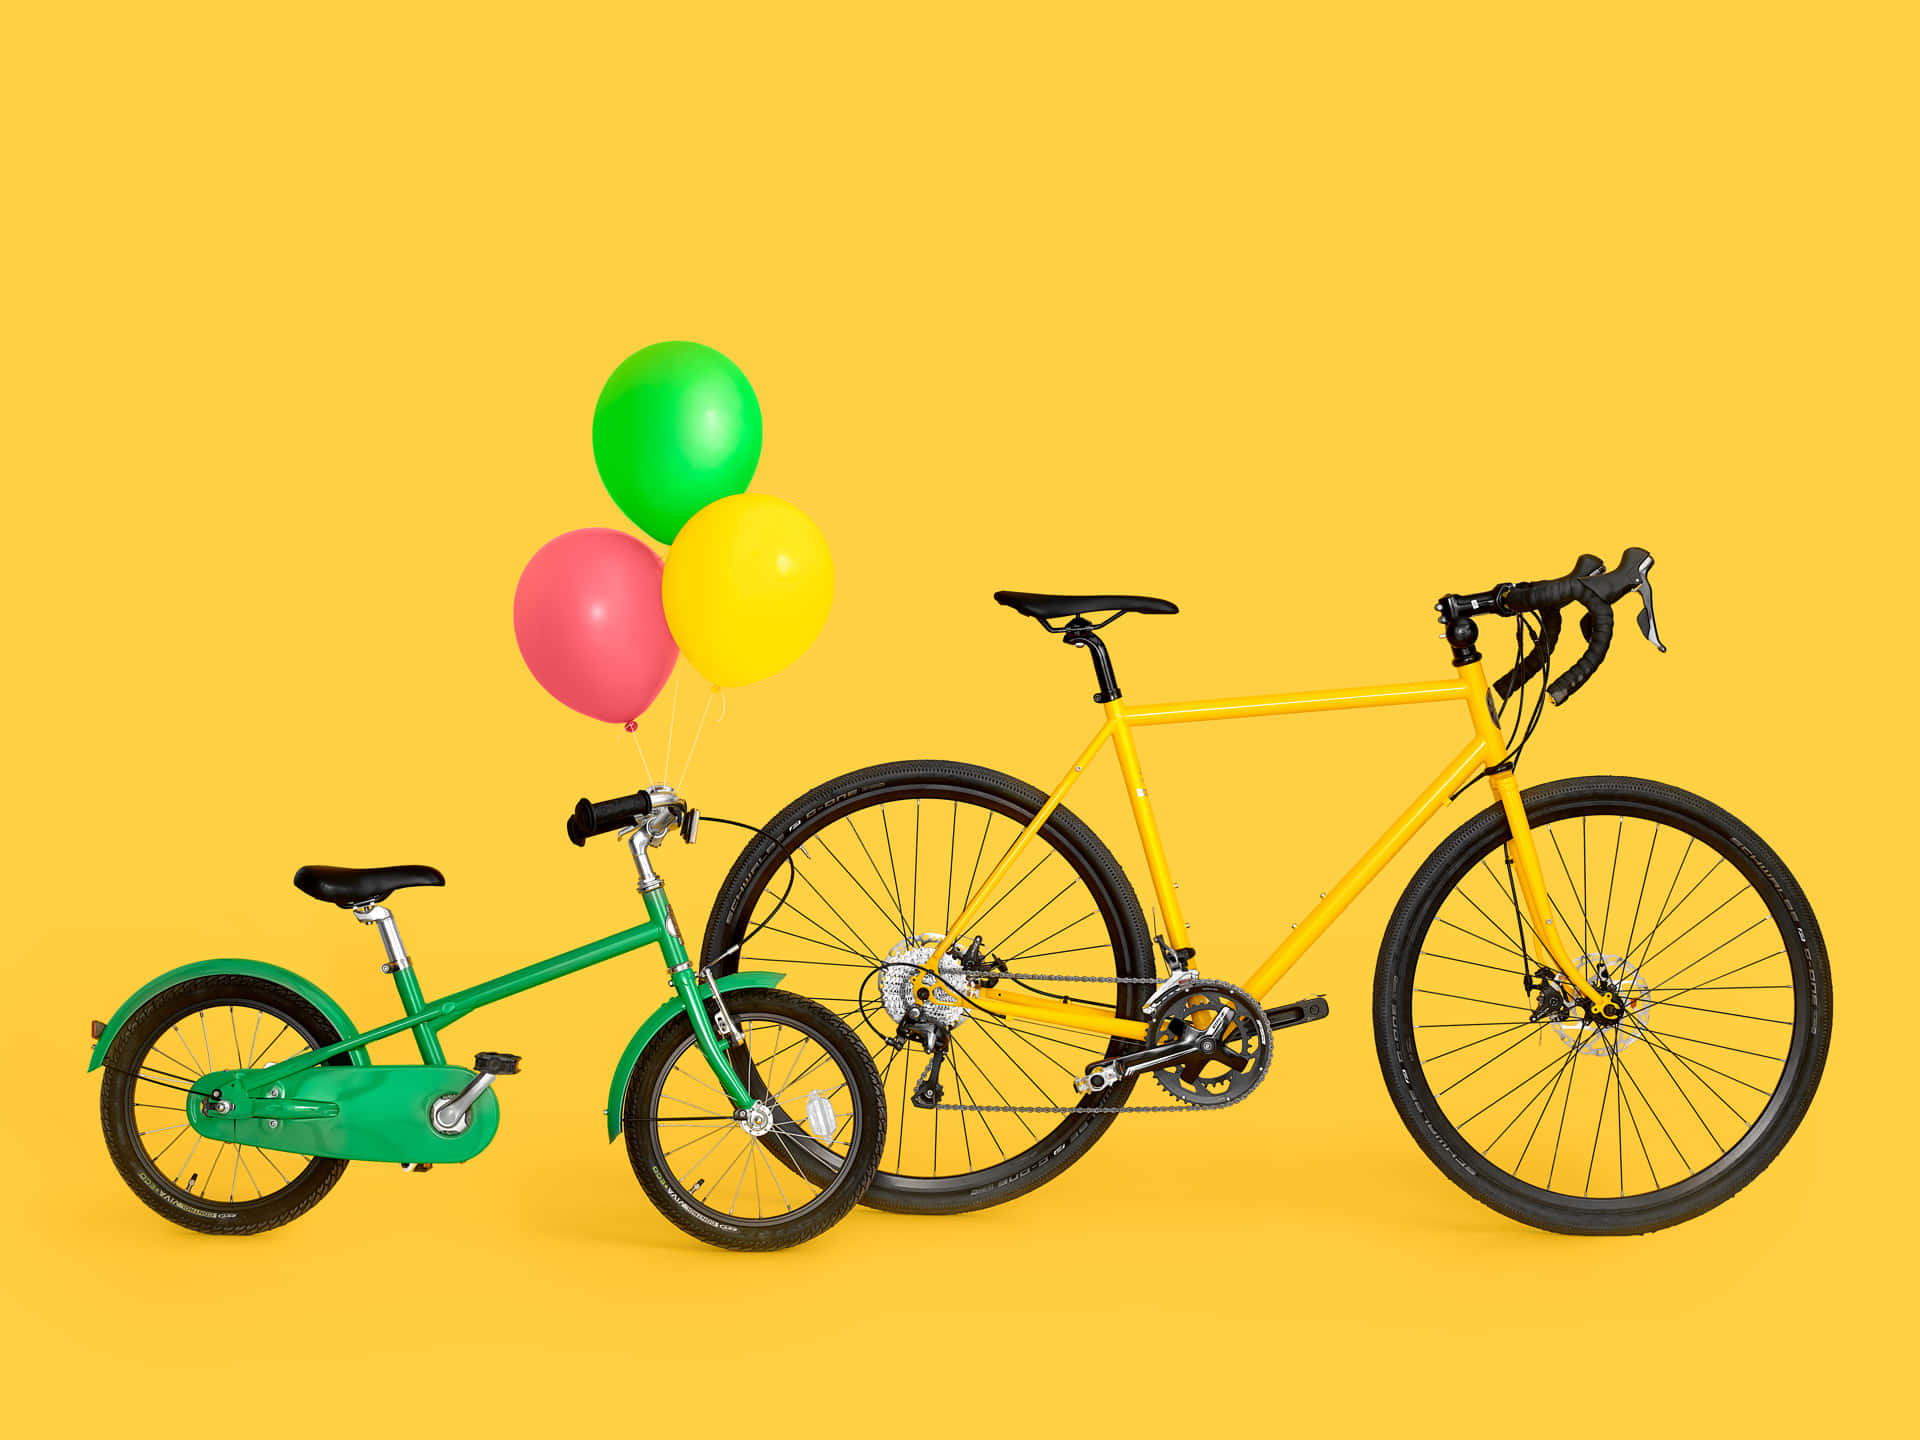 Best Bikes Background Poster With Balloons